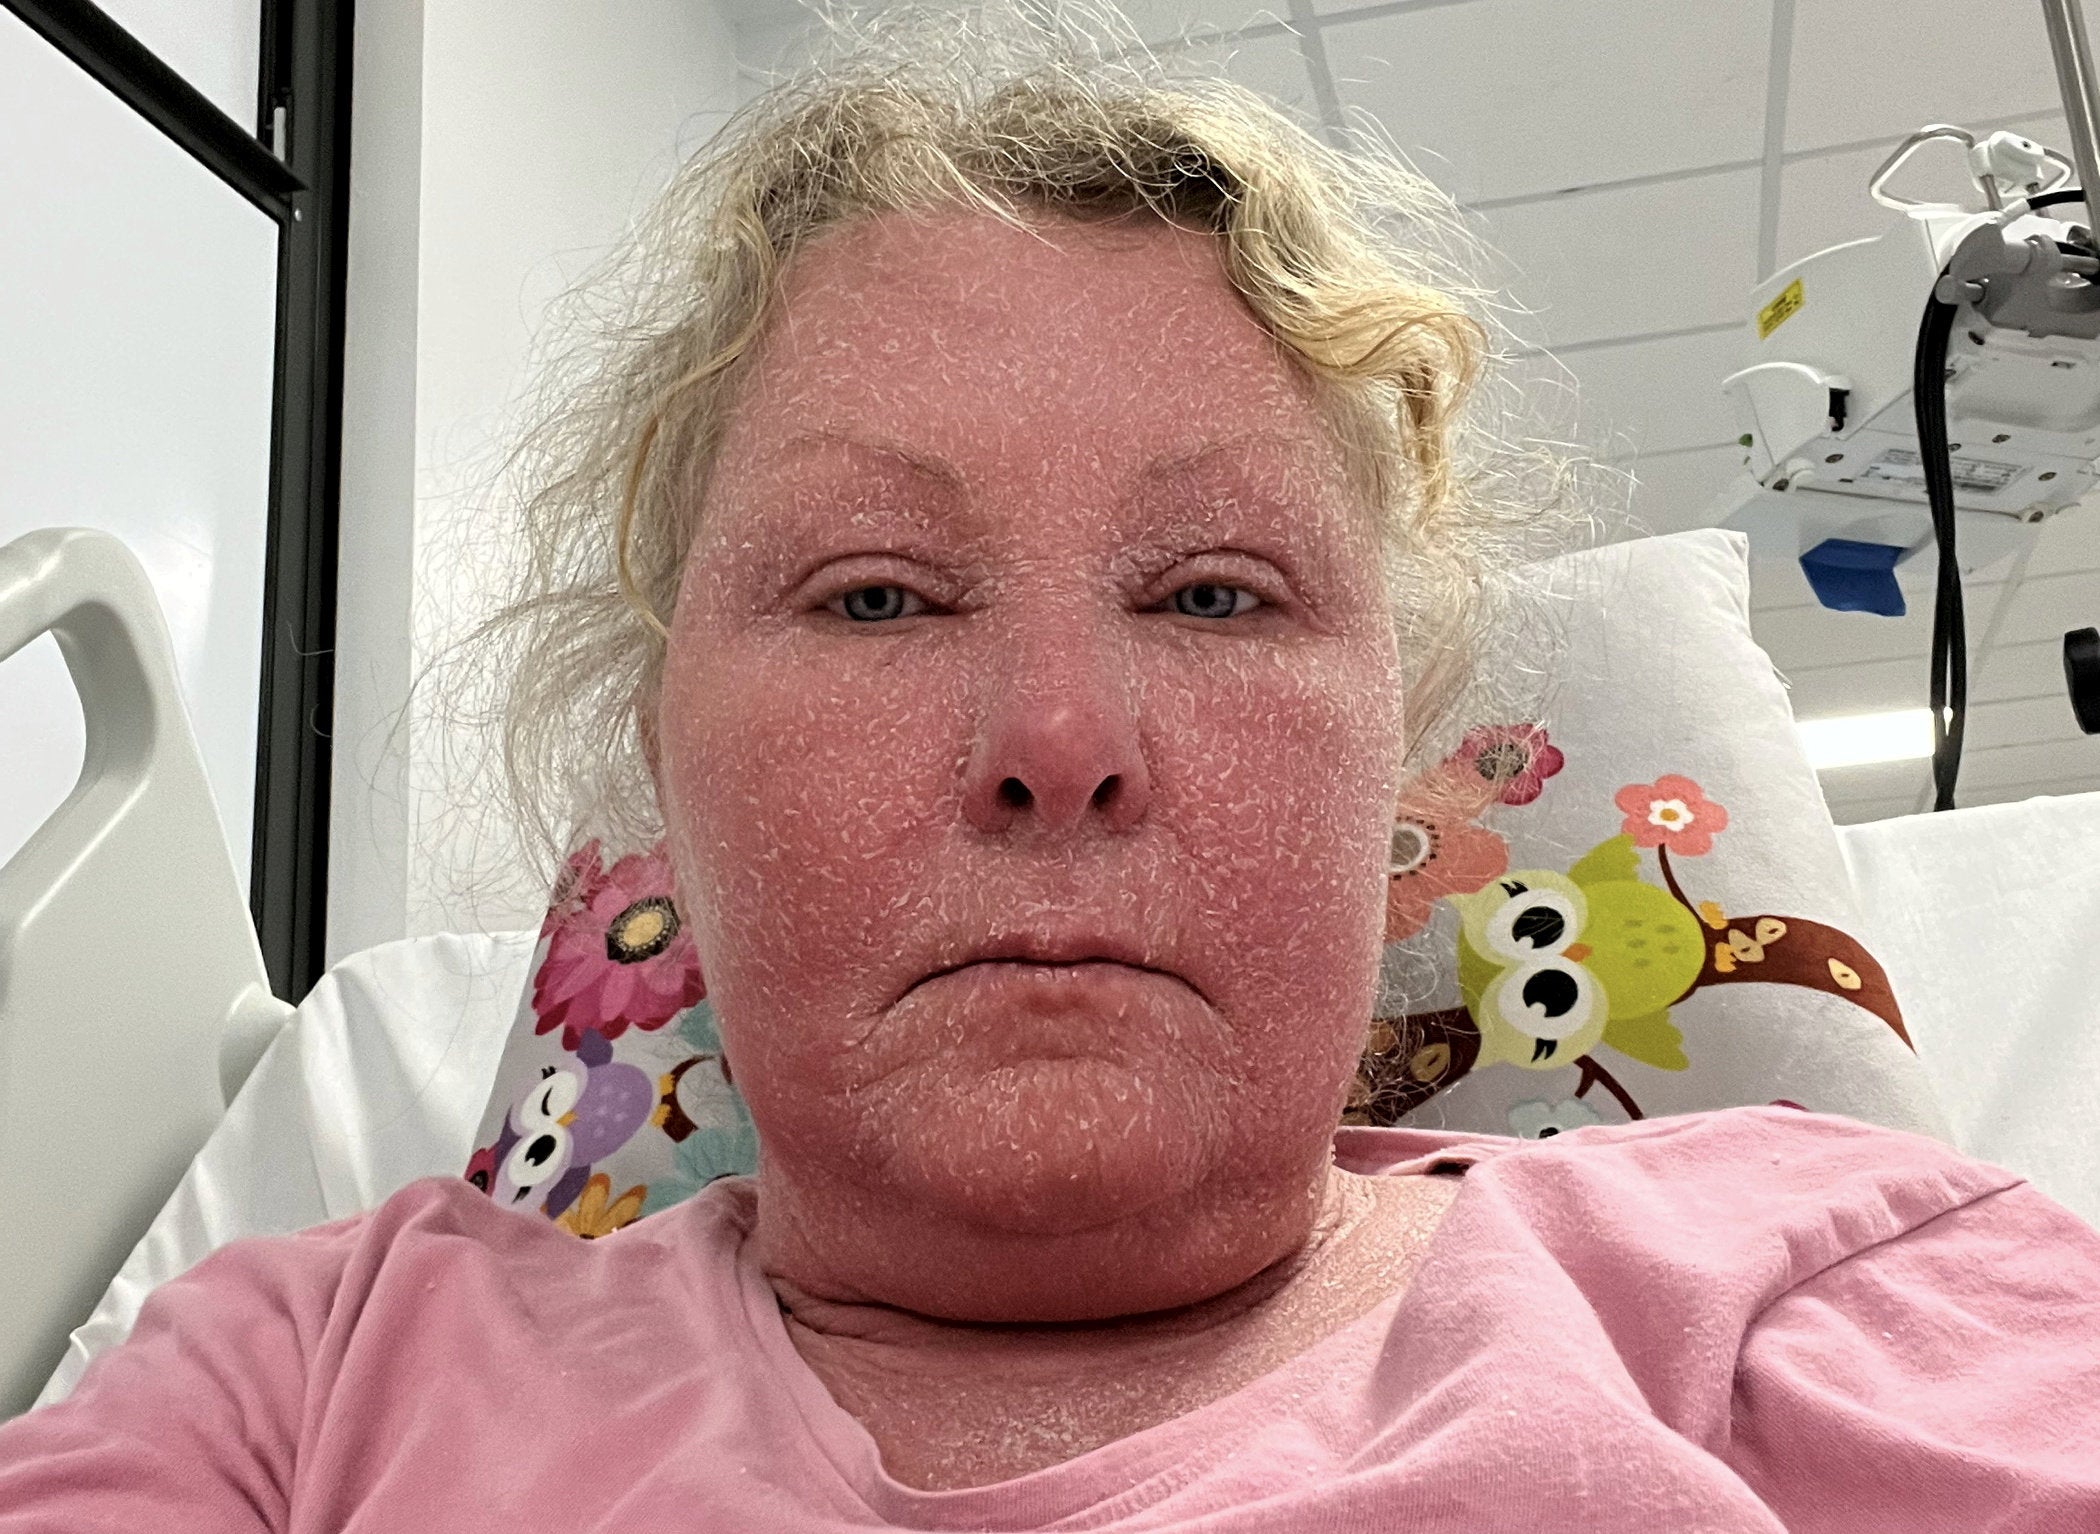 Sharon Shute said it felt like her face was on fire as she went through severe topical steroid withdrawal